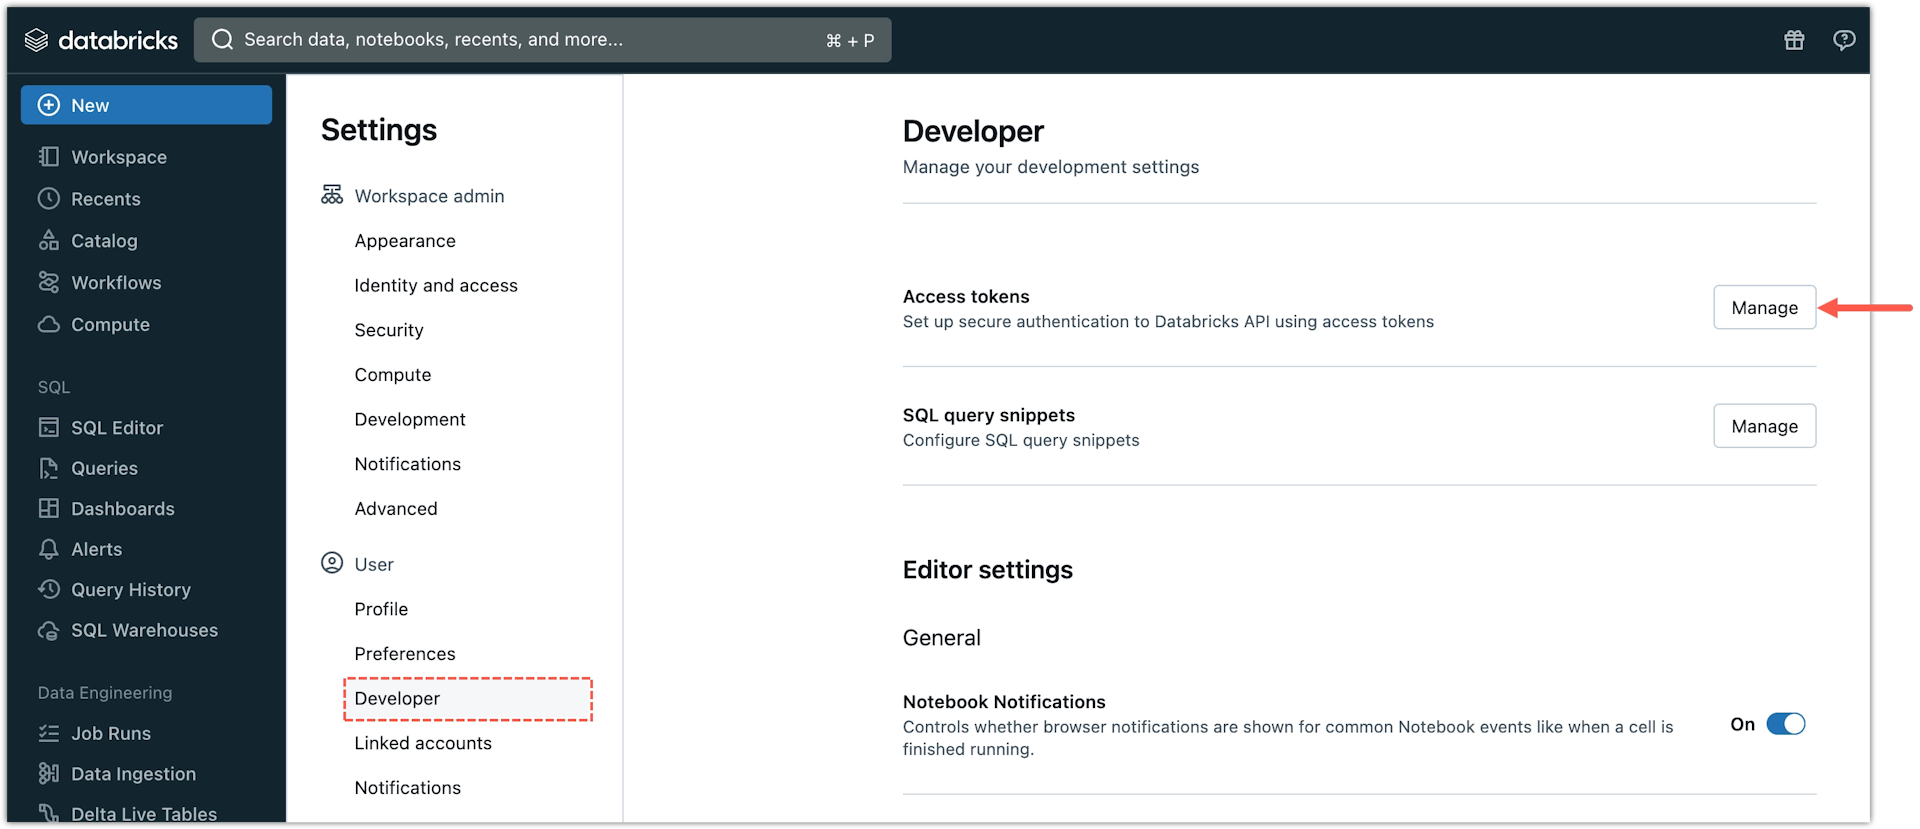 Databricks account - Select Developer and click Manage for Access Tokens